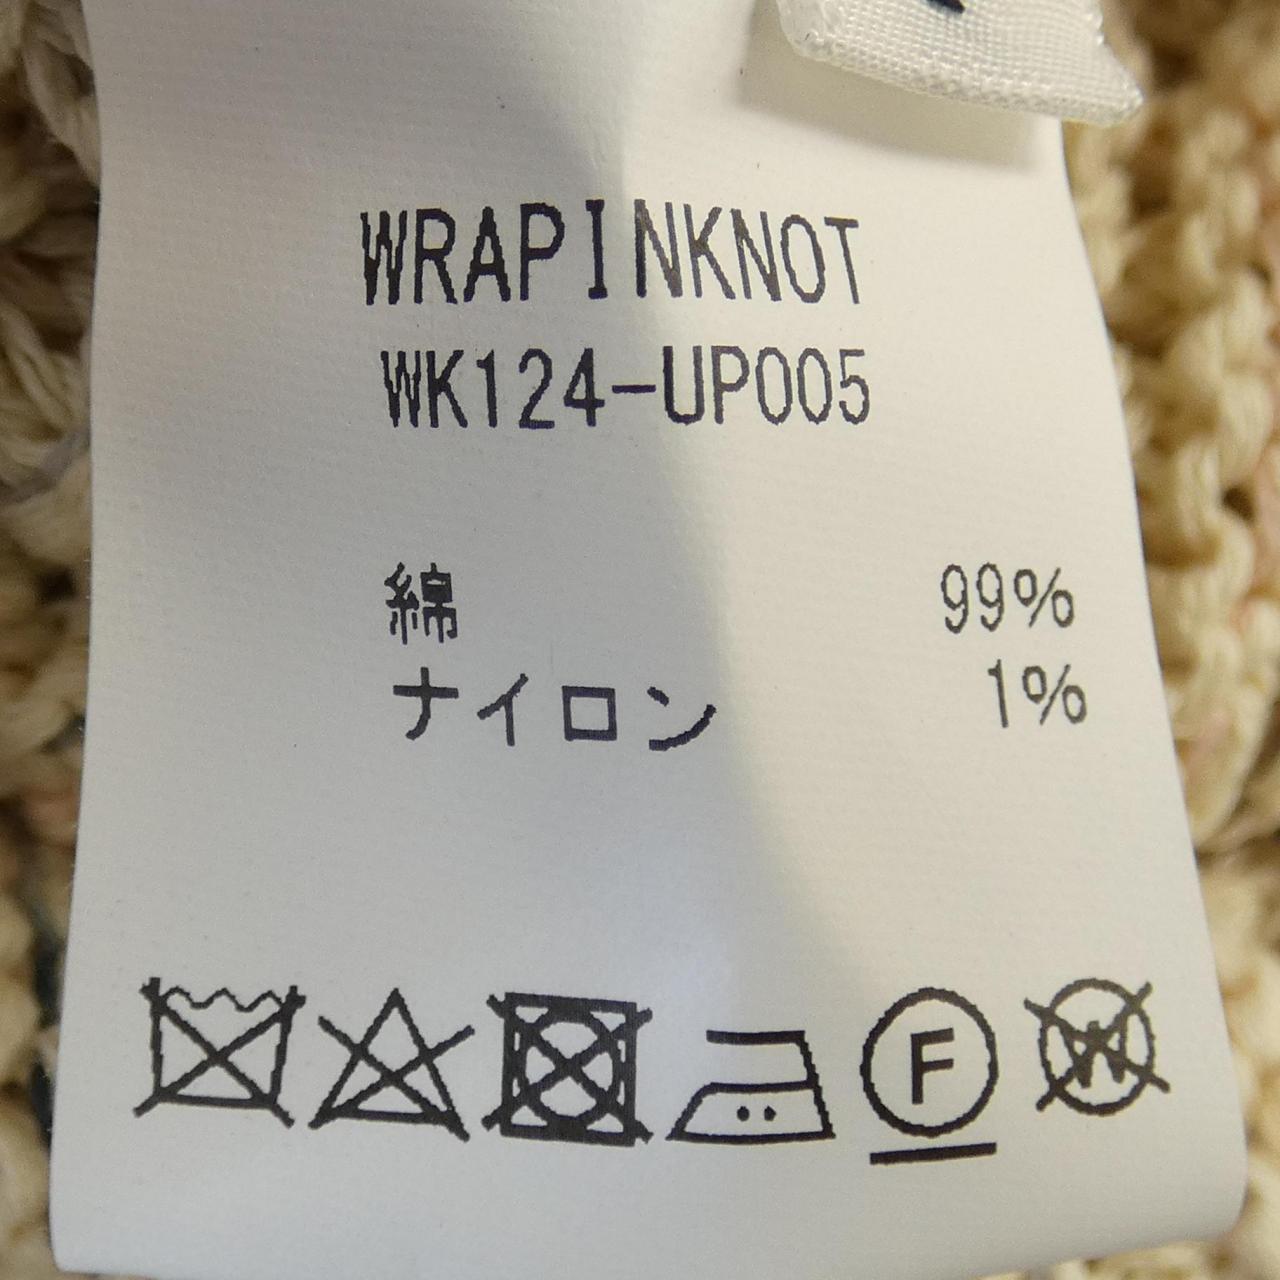 Wrapping knot WRAPINKNOT knit